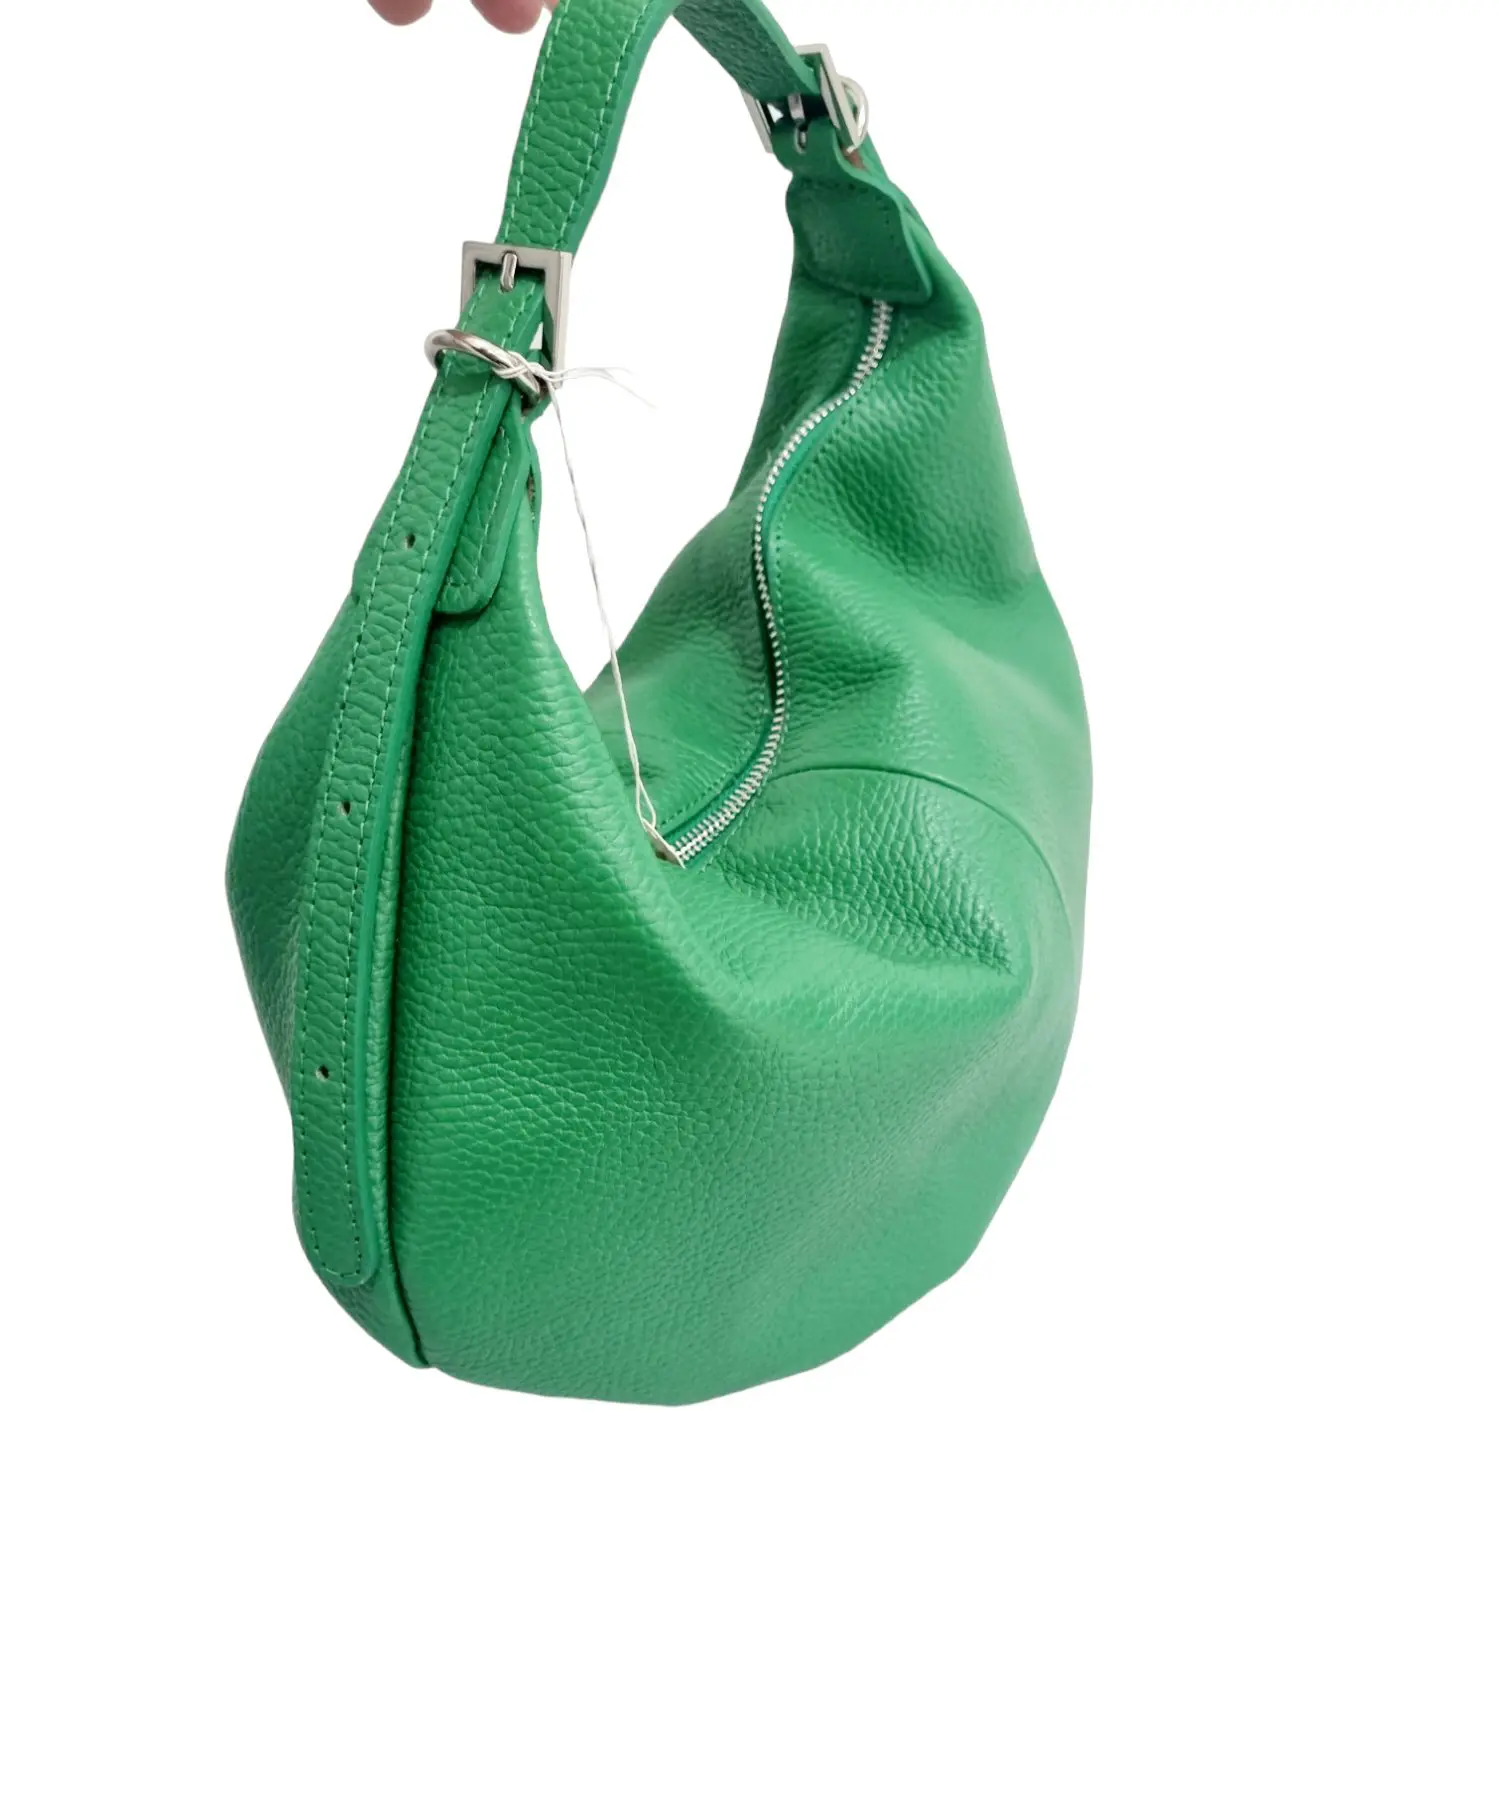 Genuine leather bag, made in Italy, with extendable handle, lined interior with side pockets. Green colour.